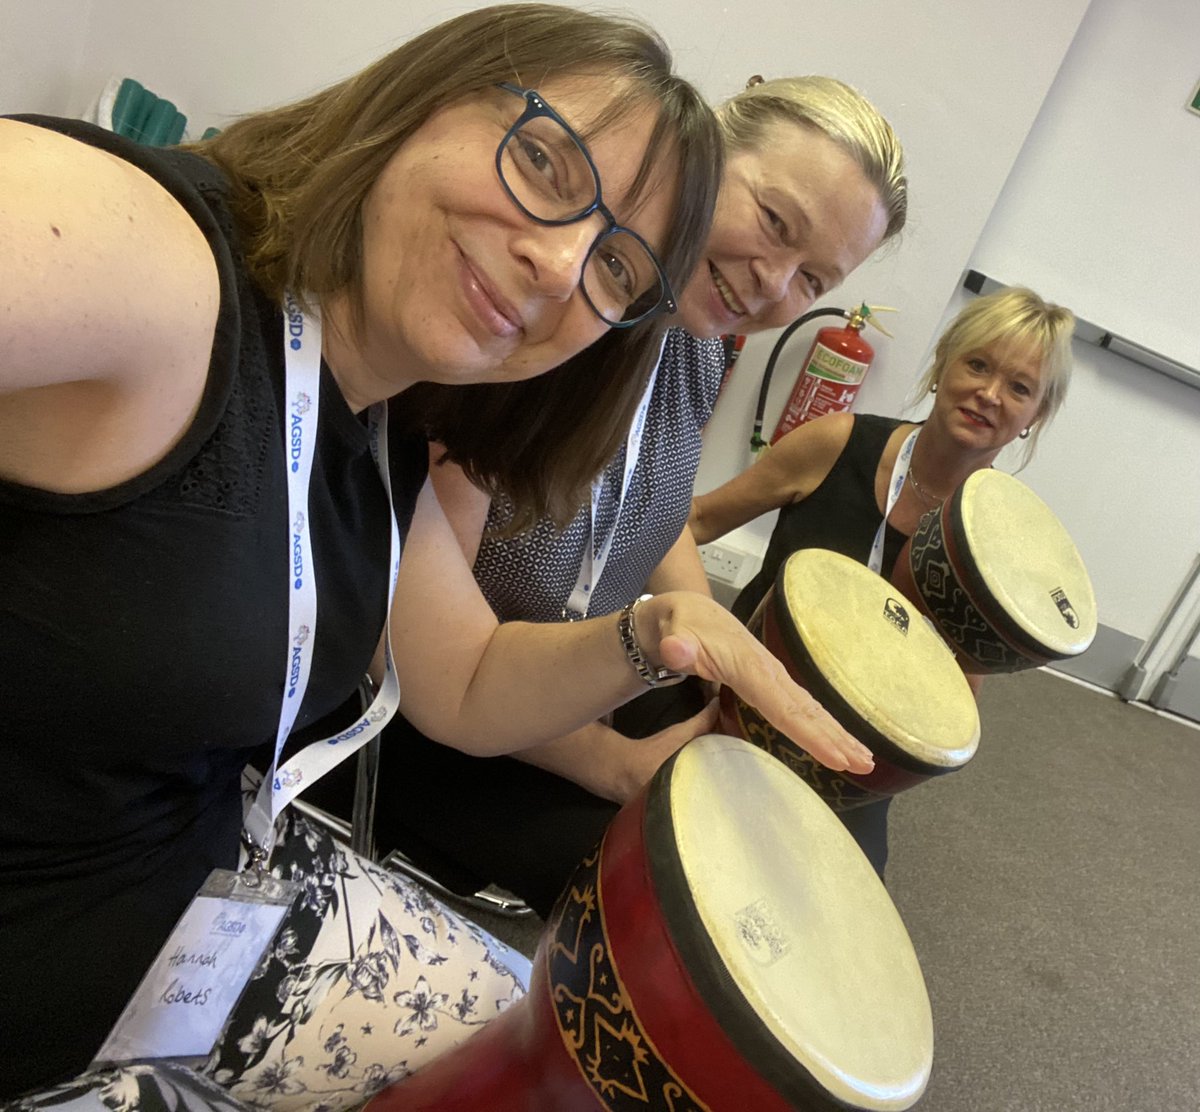 Getting our groove on at the drumming workshop at @AgsdUk #GSD #rhythm